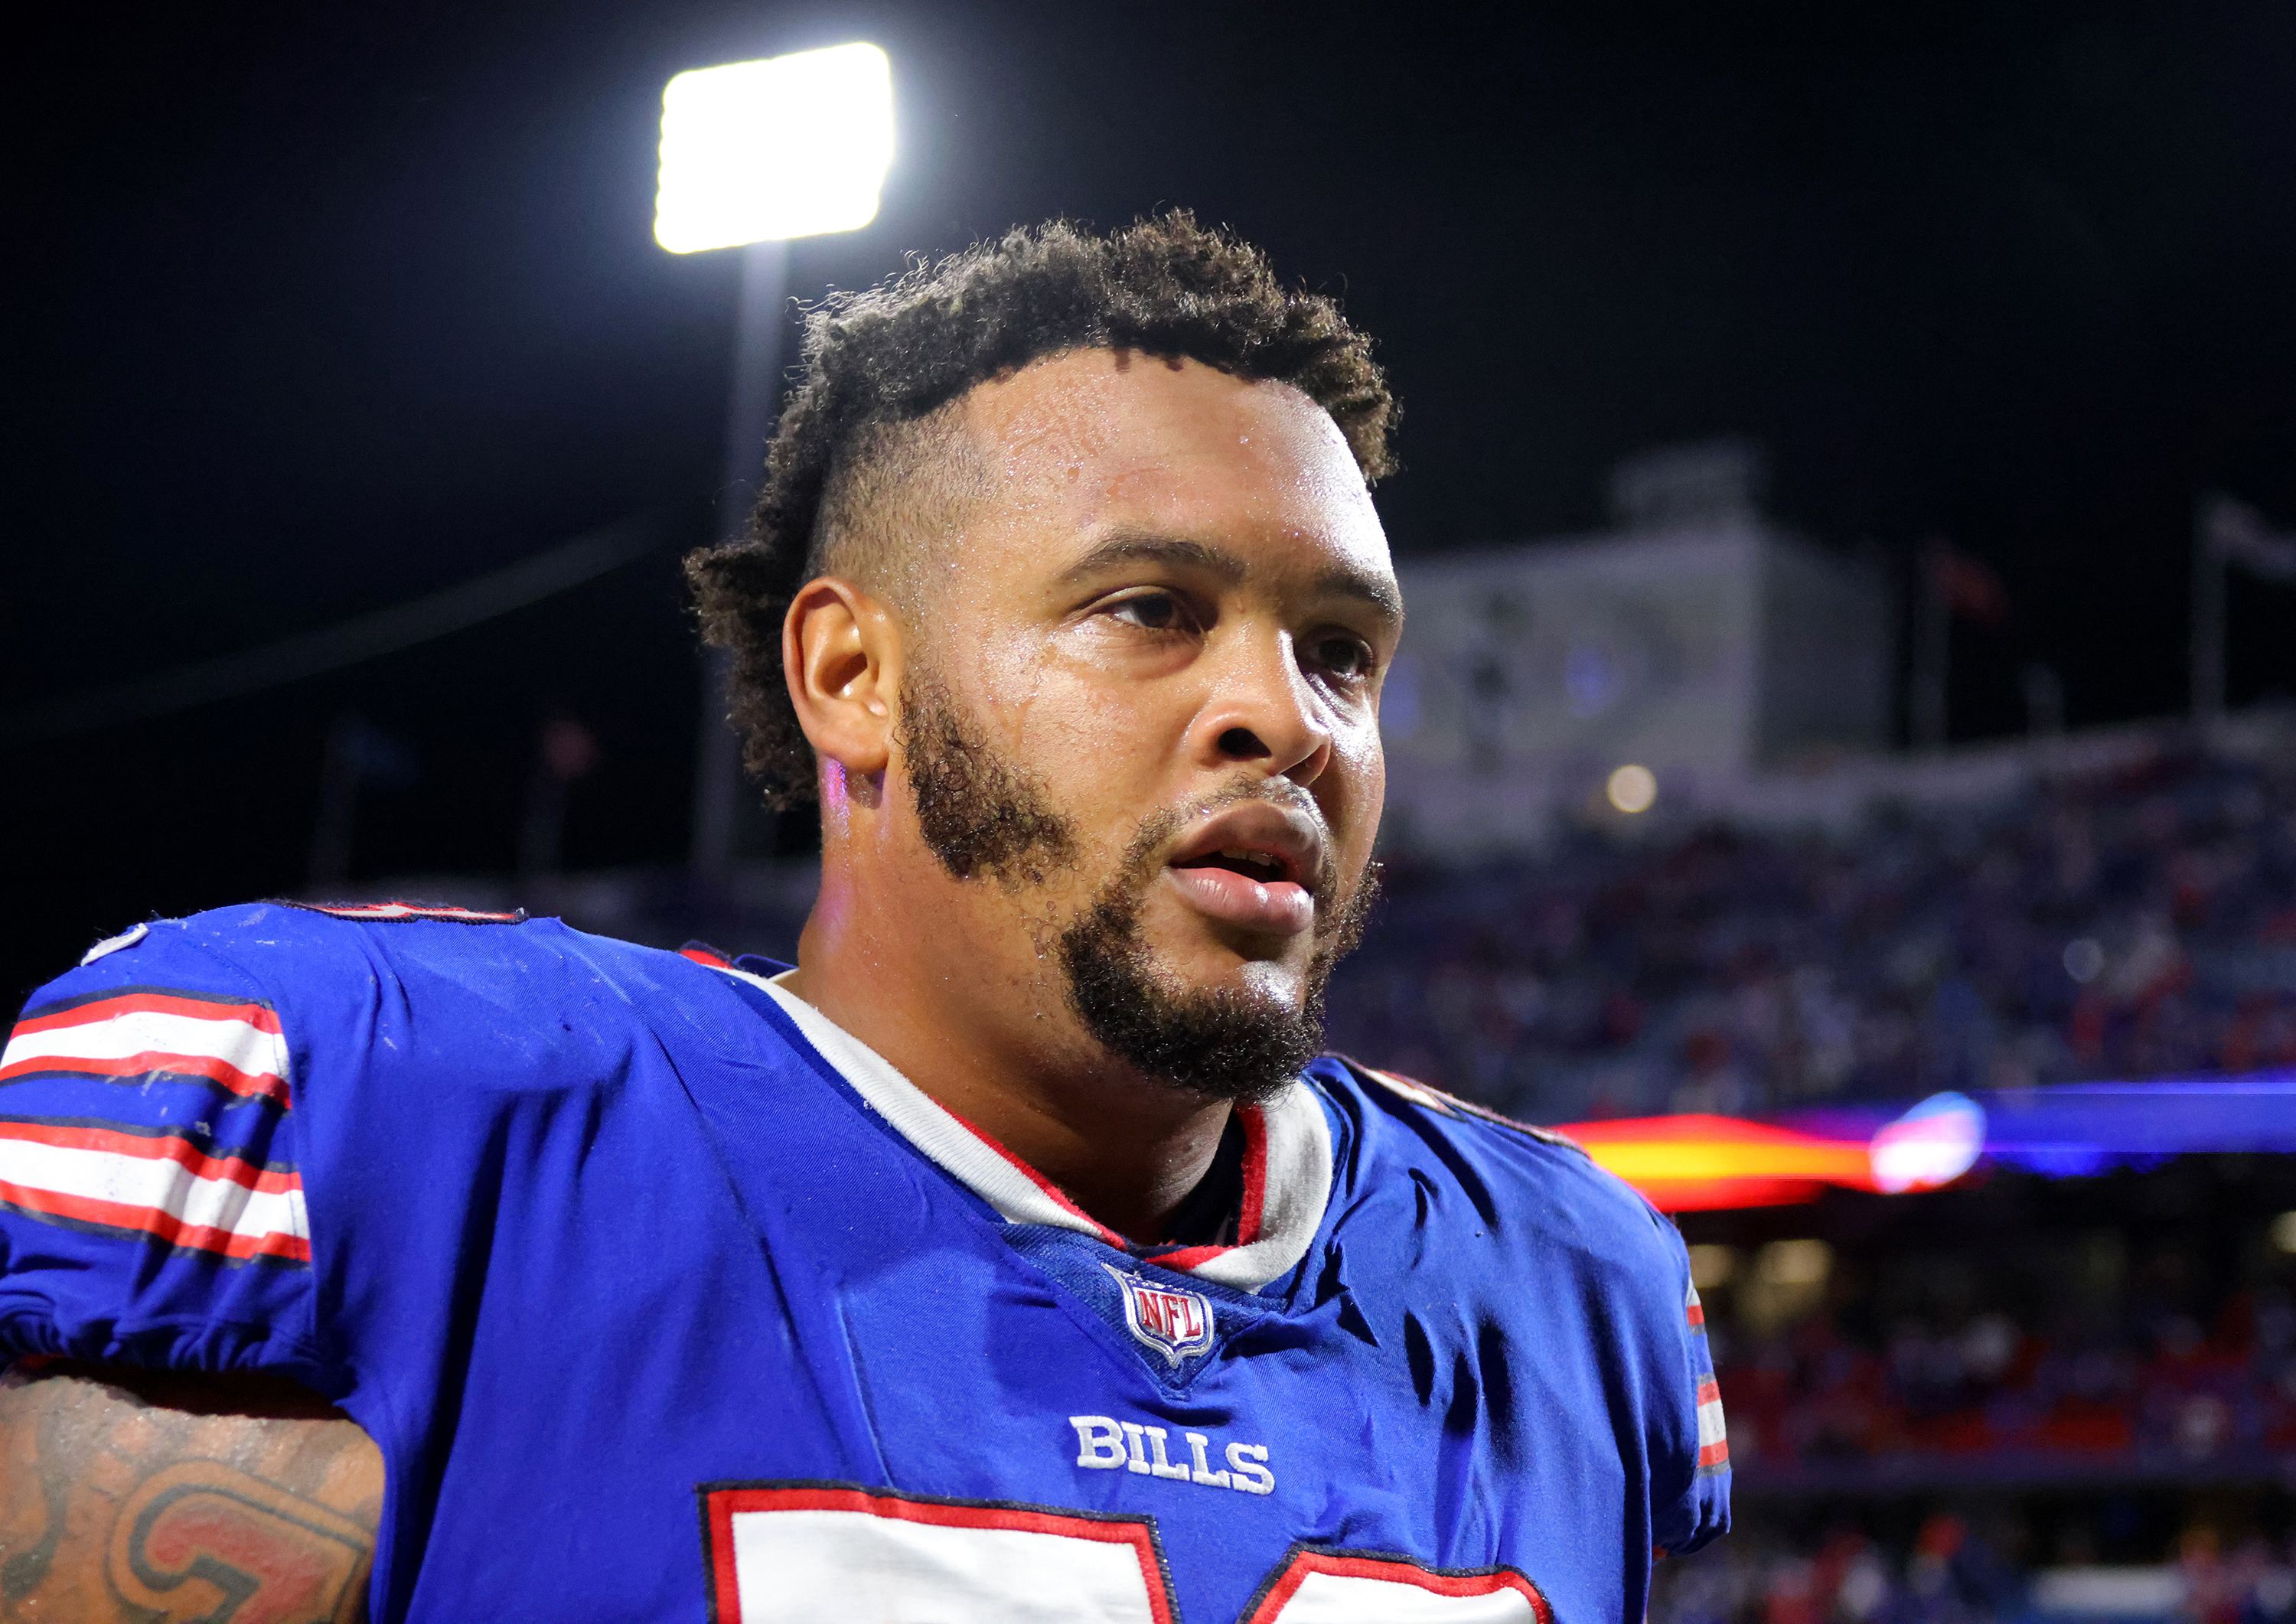 Buffalo Bills offensive tackle Dion Dawkins after a game against the Tennessee Titans at Highmark Stadium on September 19, in Orchard Park, New York.